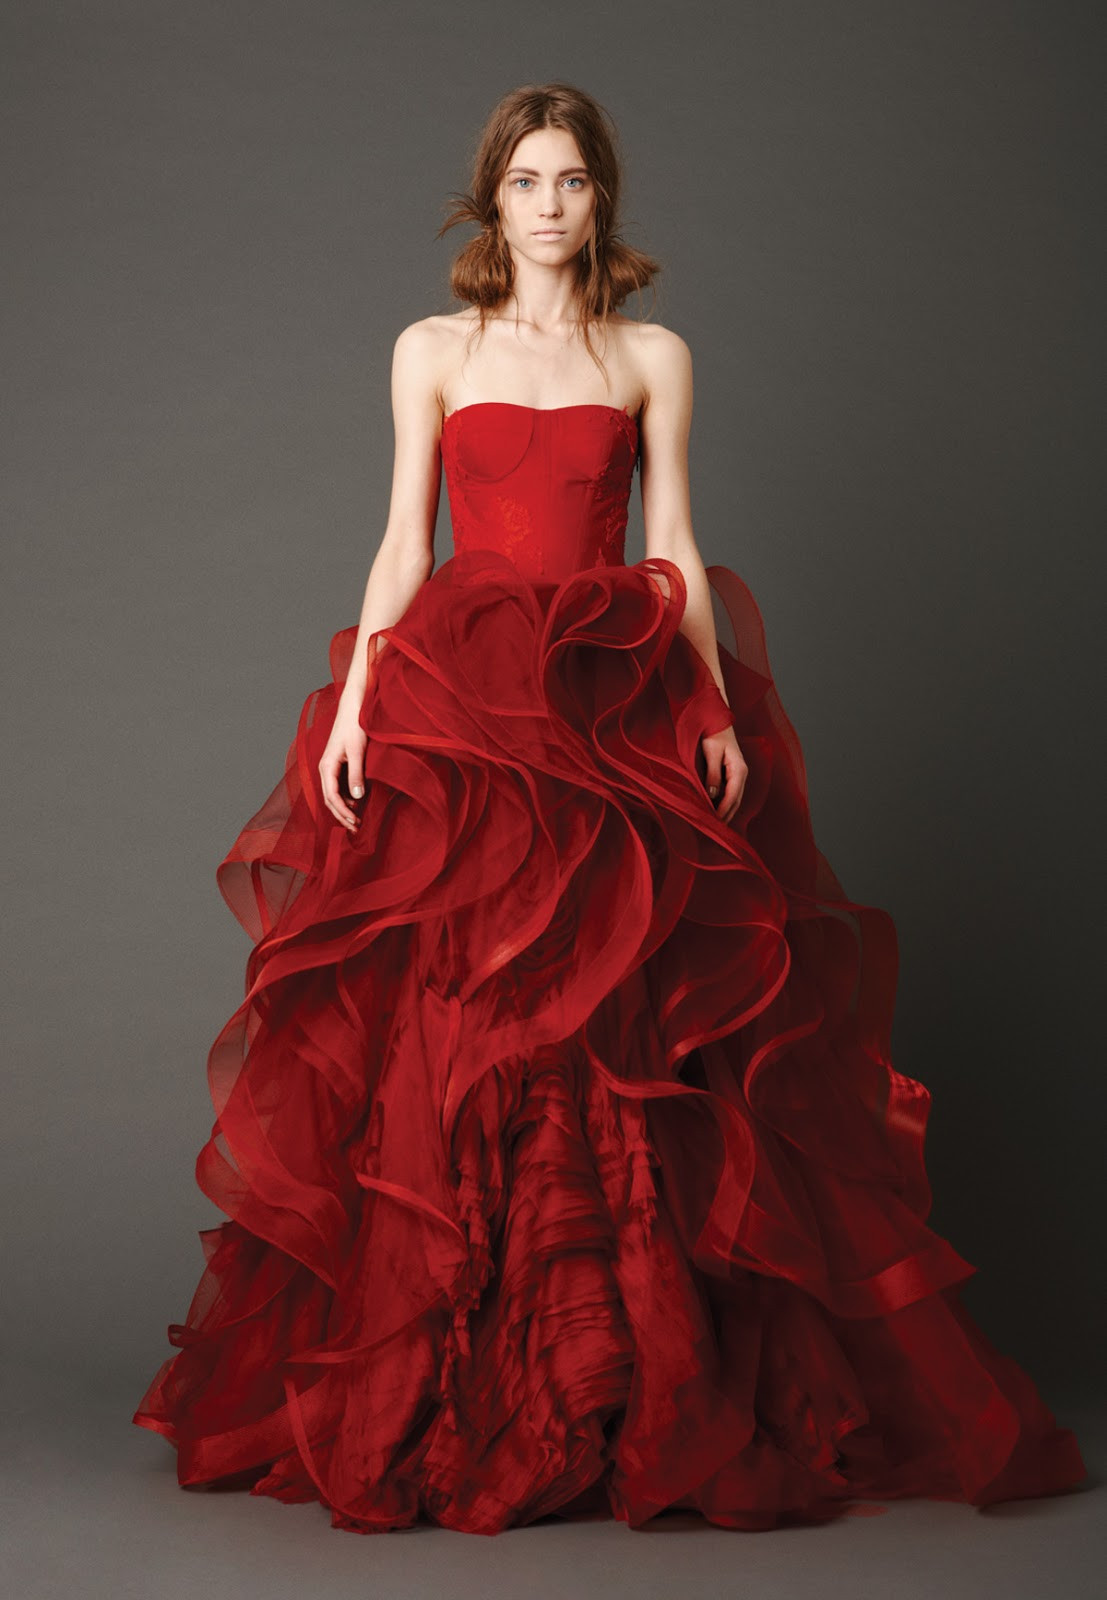 Red Wedding Gown
 DressyBridal Learn Wedding Dresses 2013 Trends from Vera